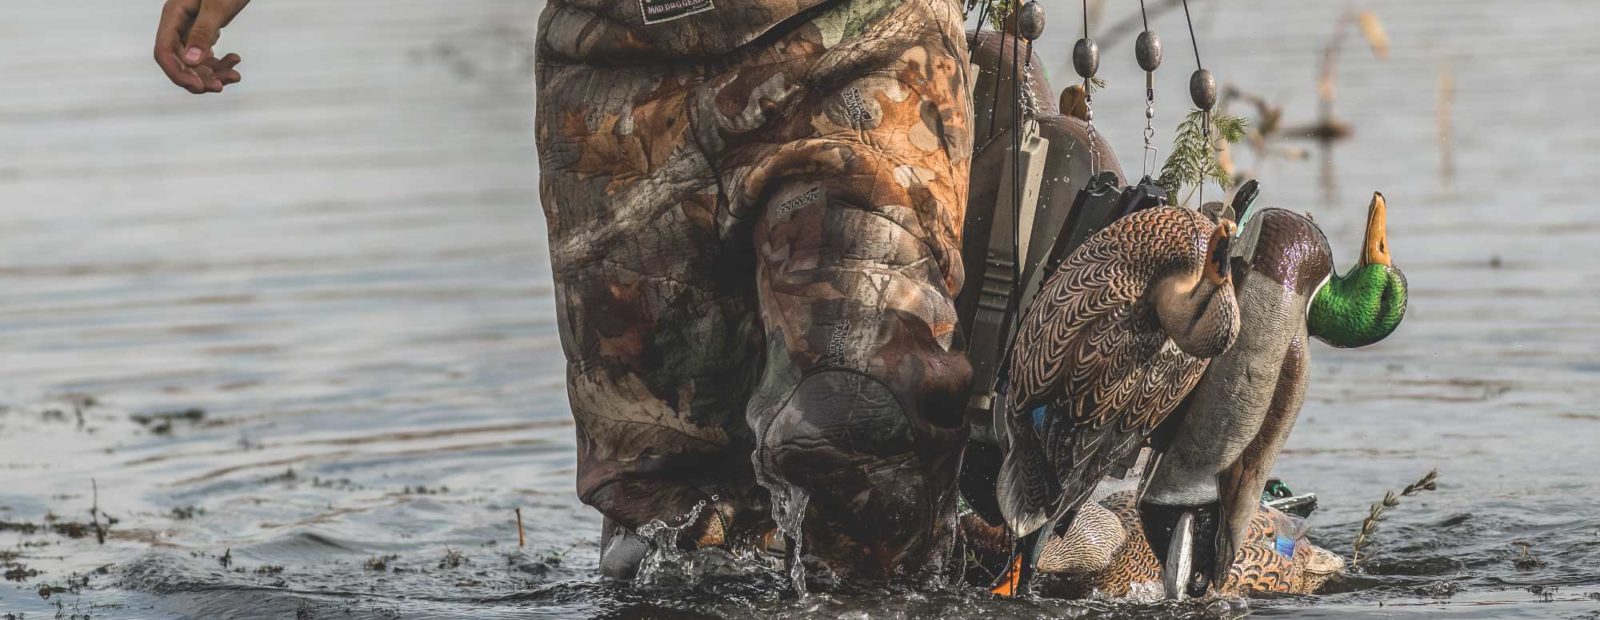 A hunter collects duck decoys from the water